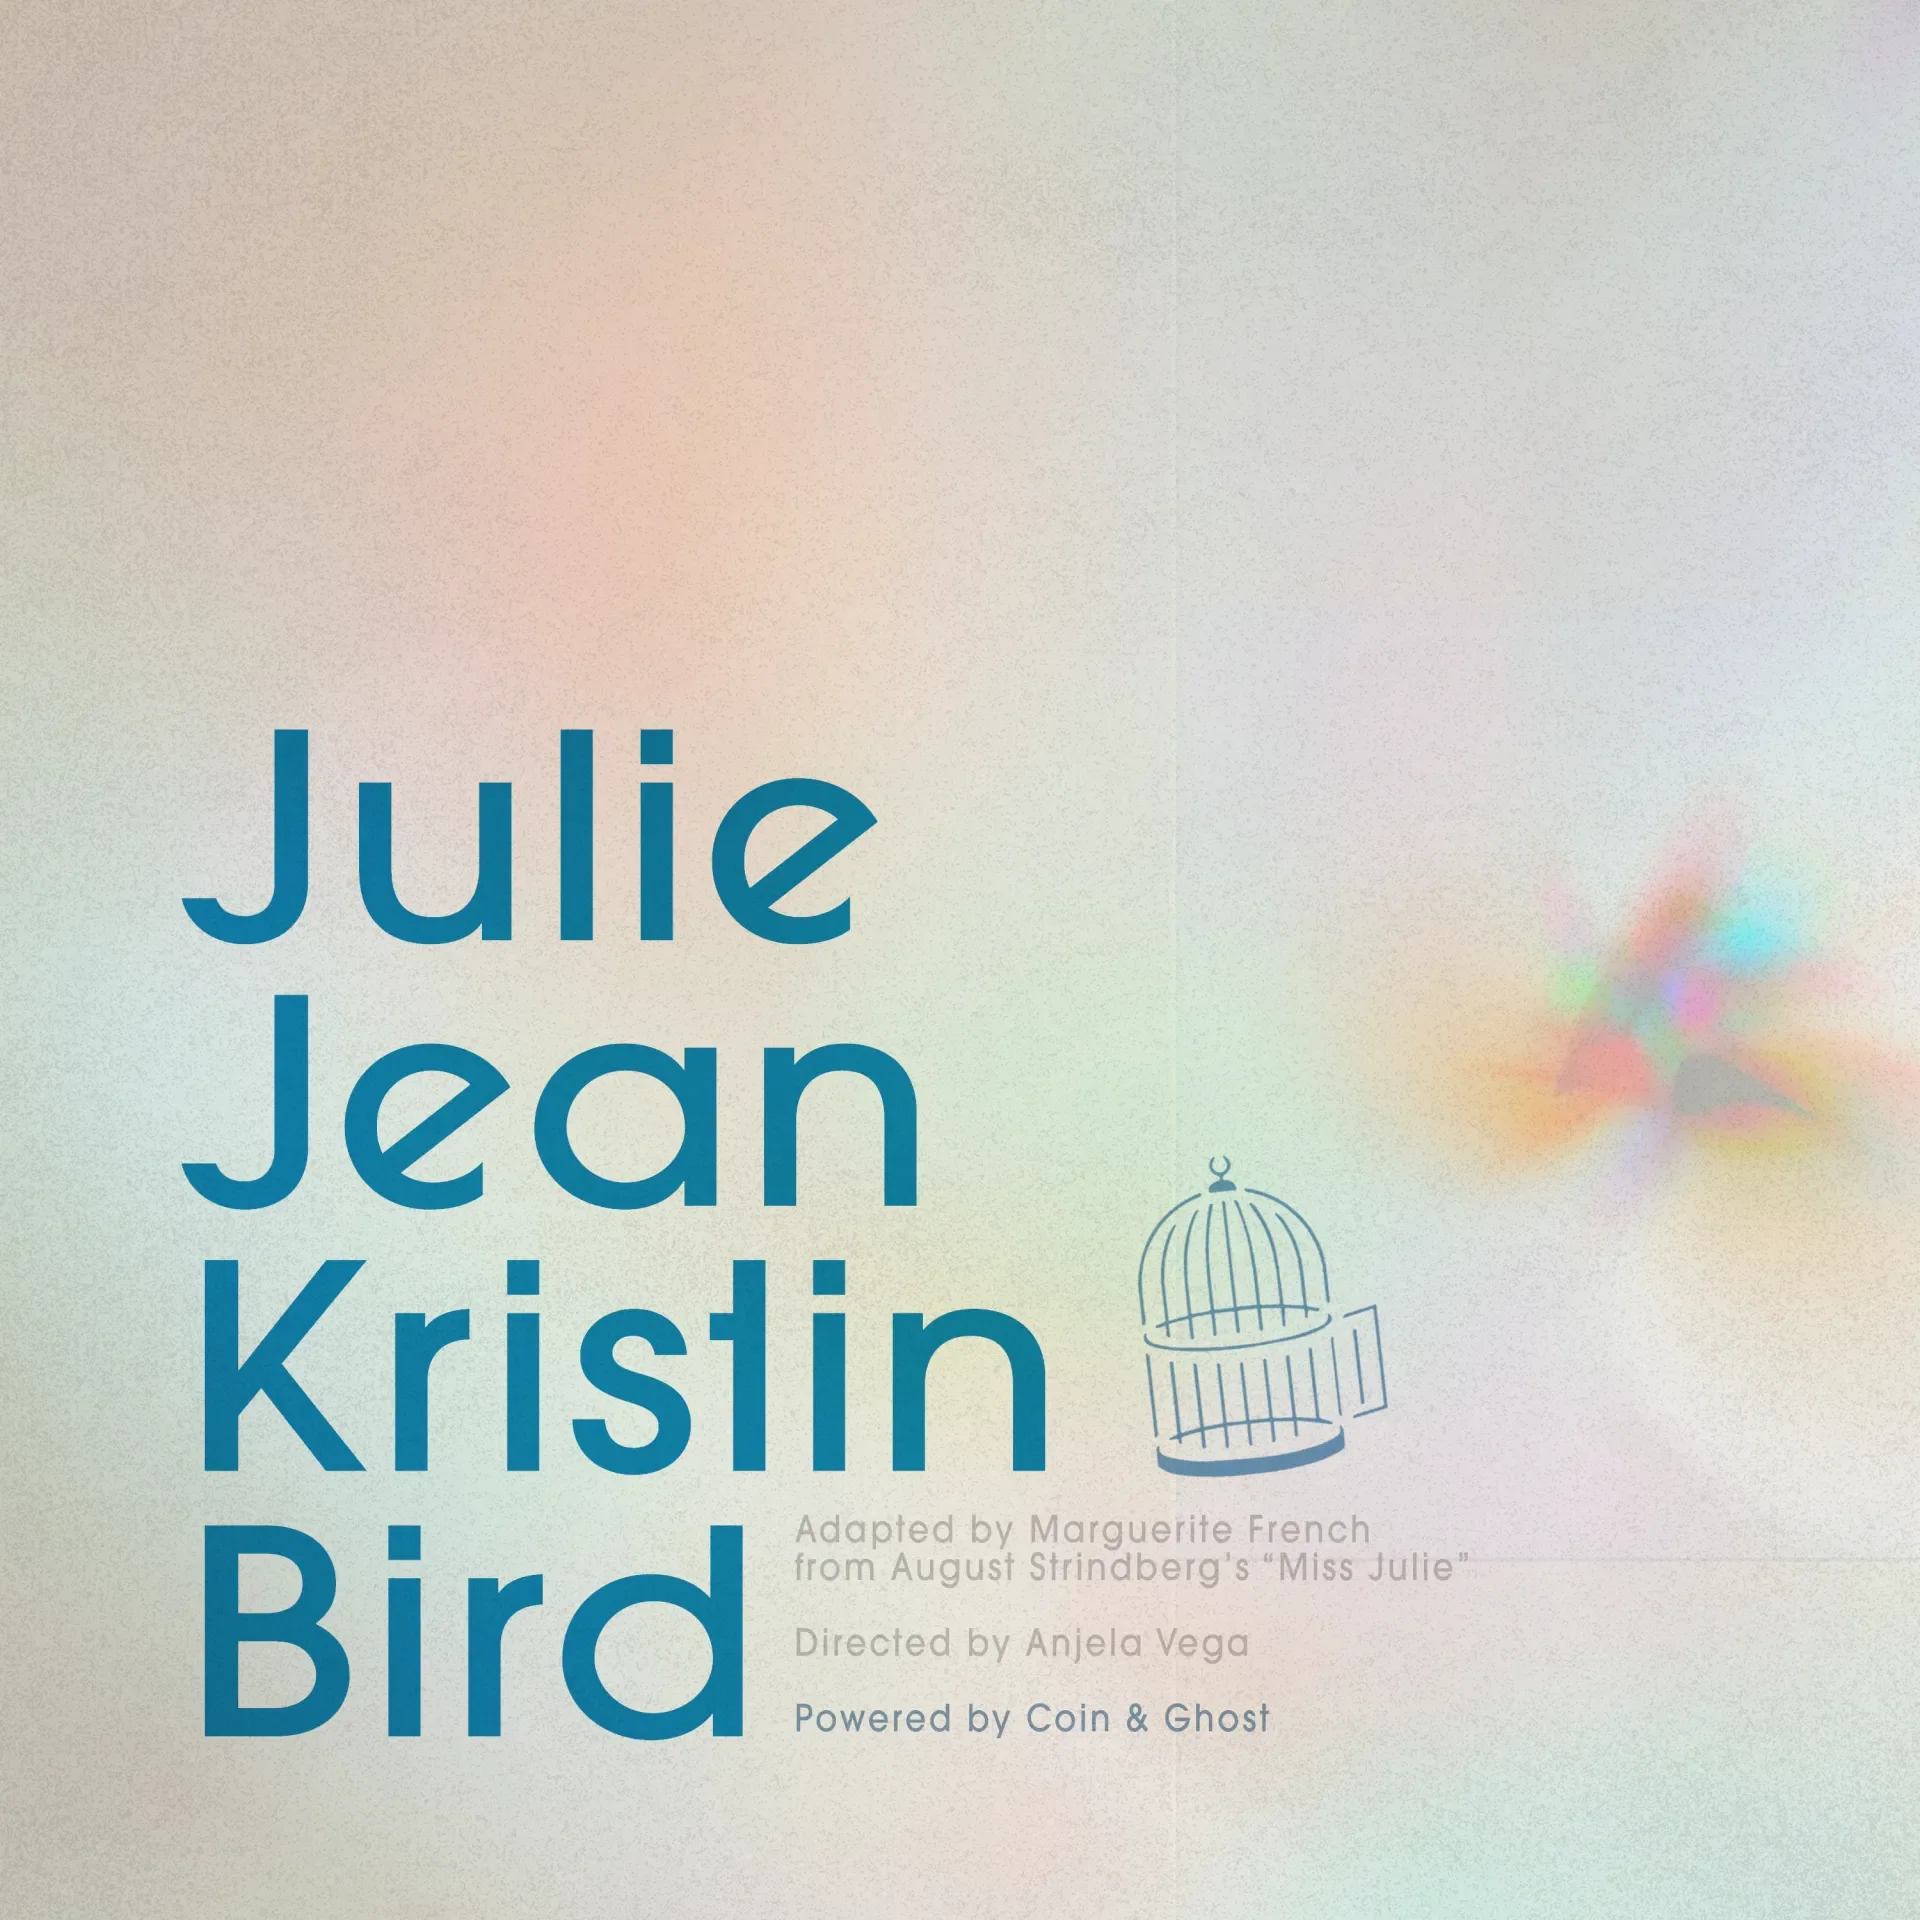 A light, prismatic background. In the foreground, a dark blue, nordic minimalist font reads: "Julie Jean Kristin Bird." To its right, an open cage.